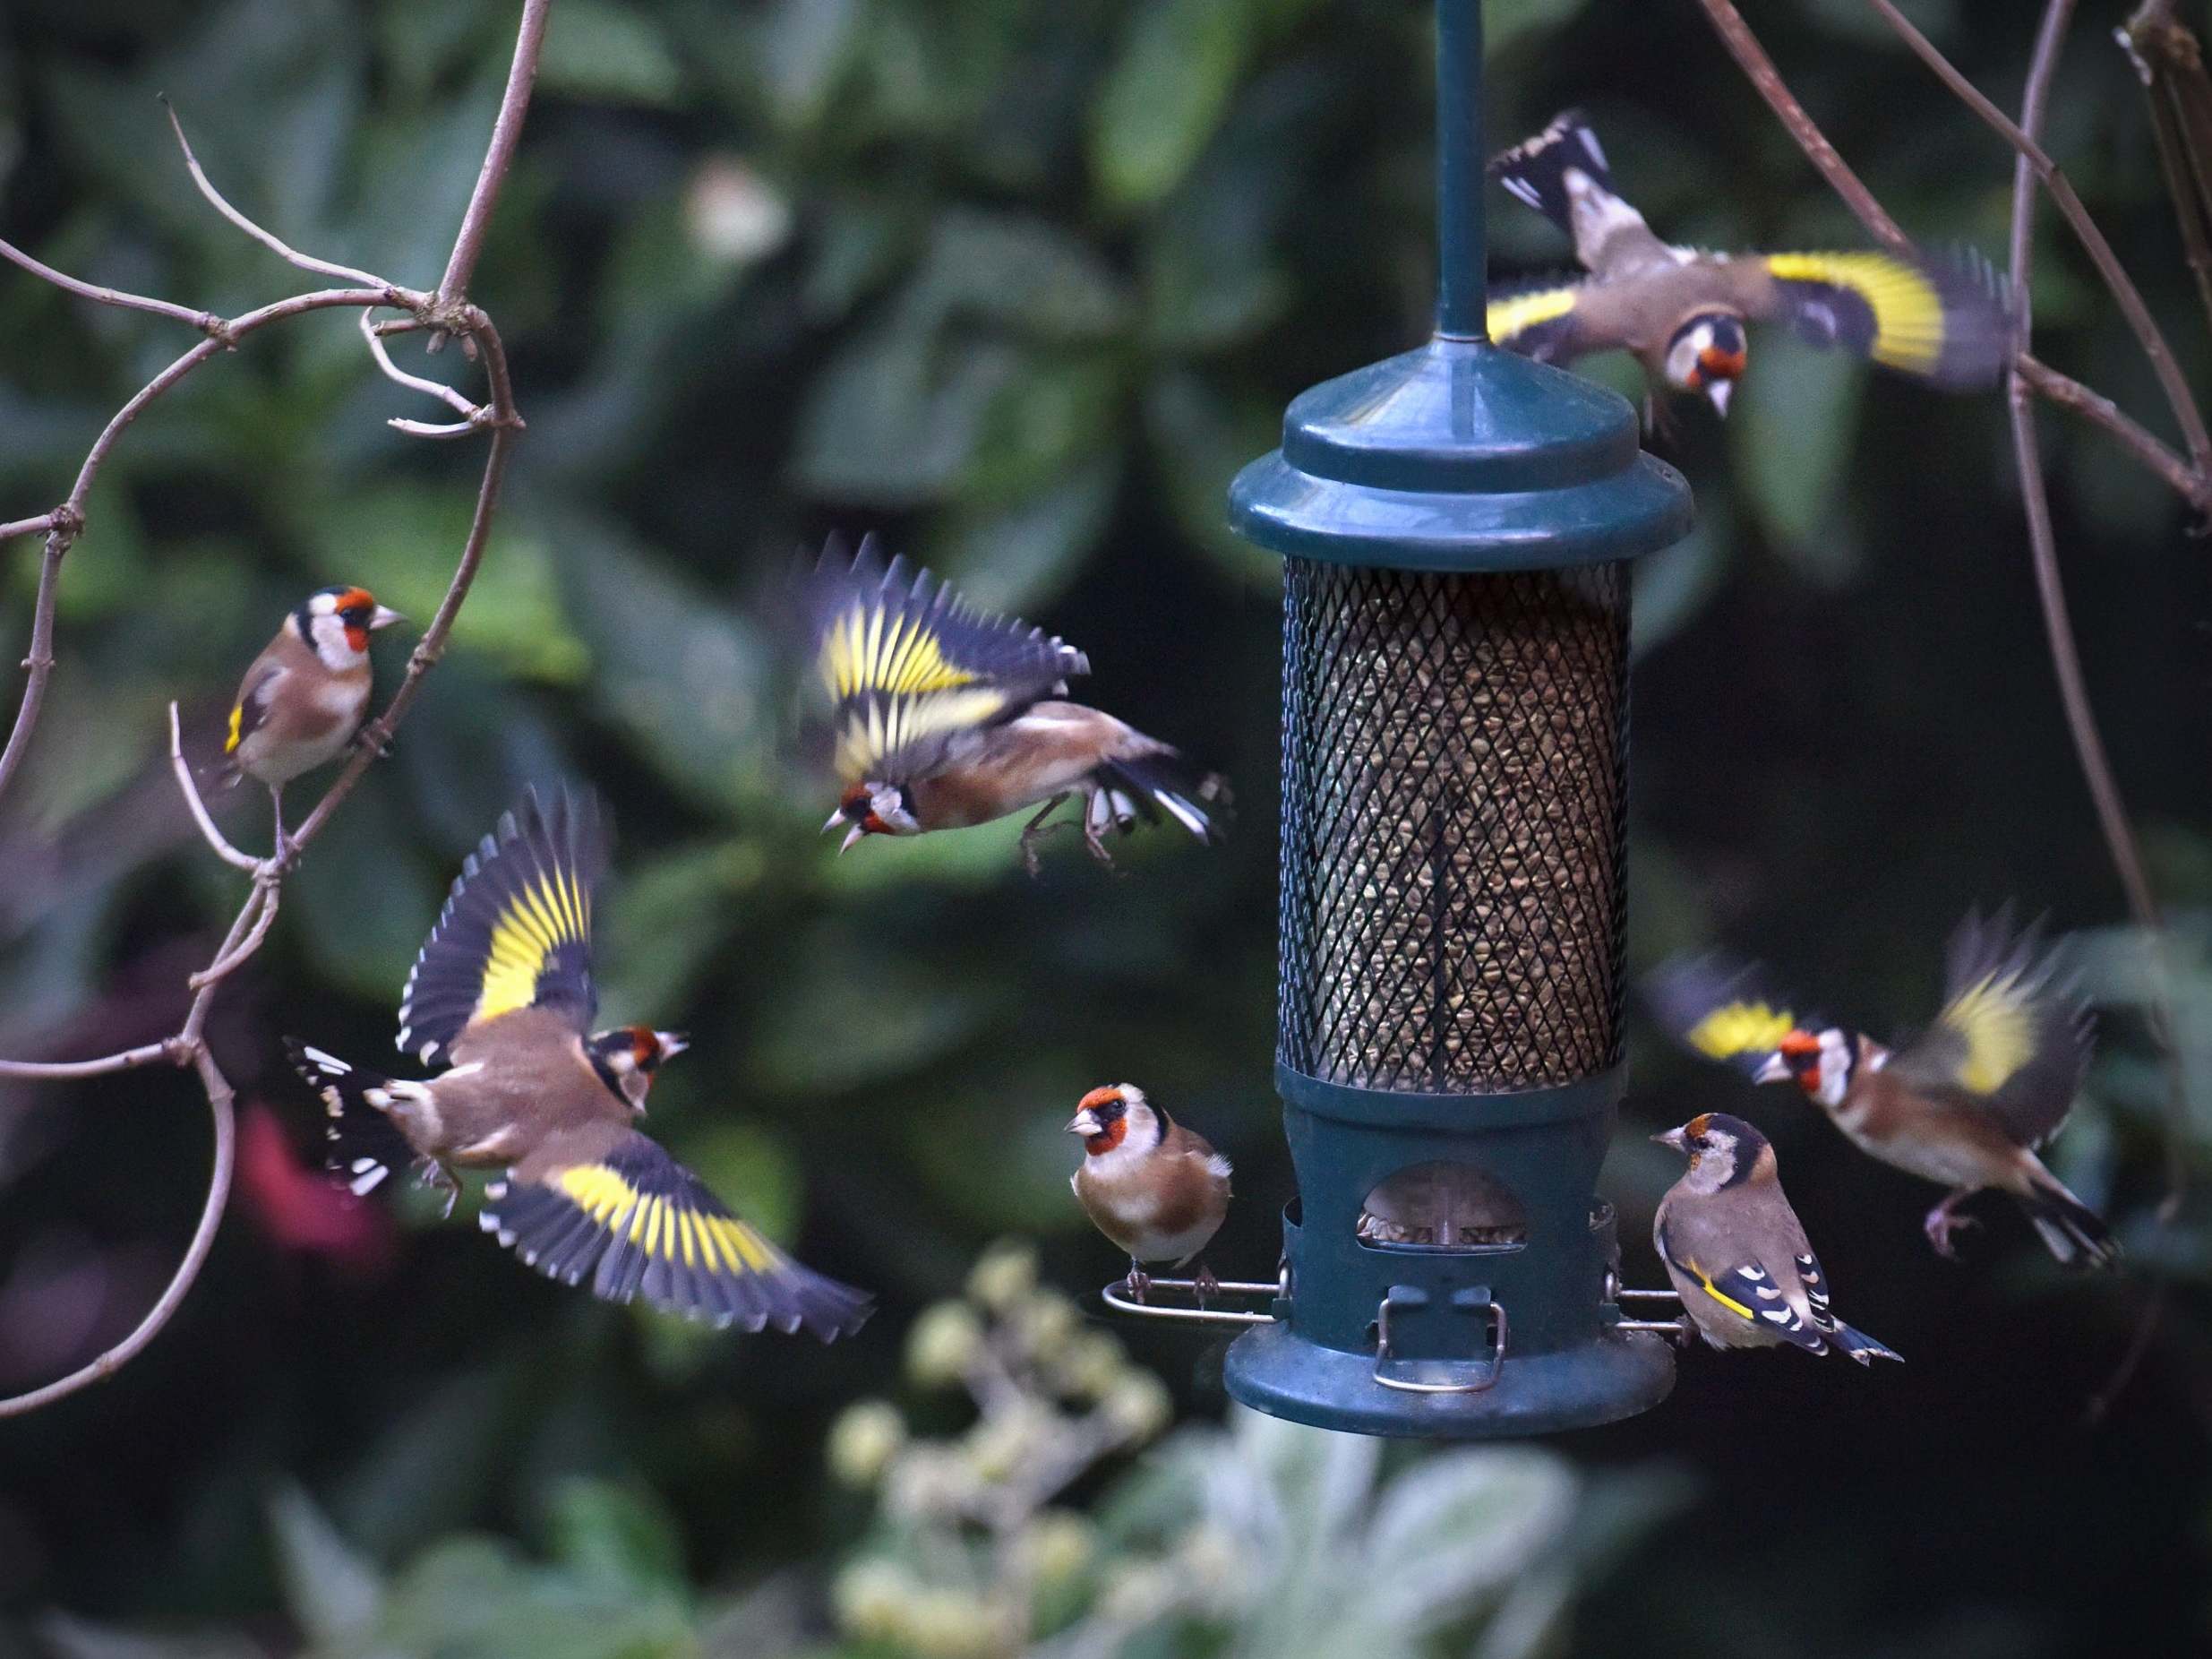 Goldfinches gather for a snack at a garden feeder